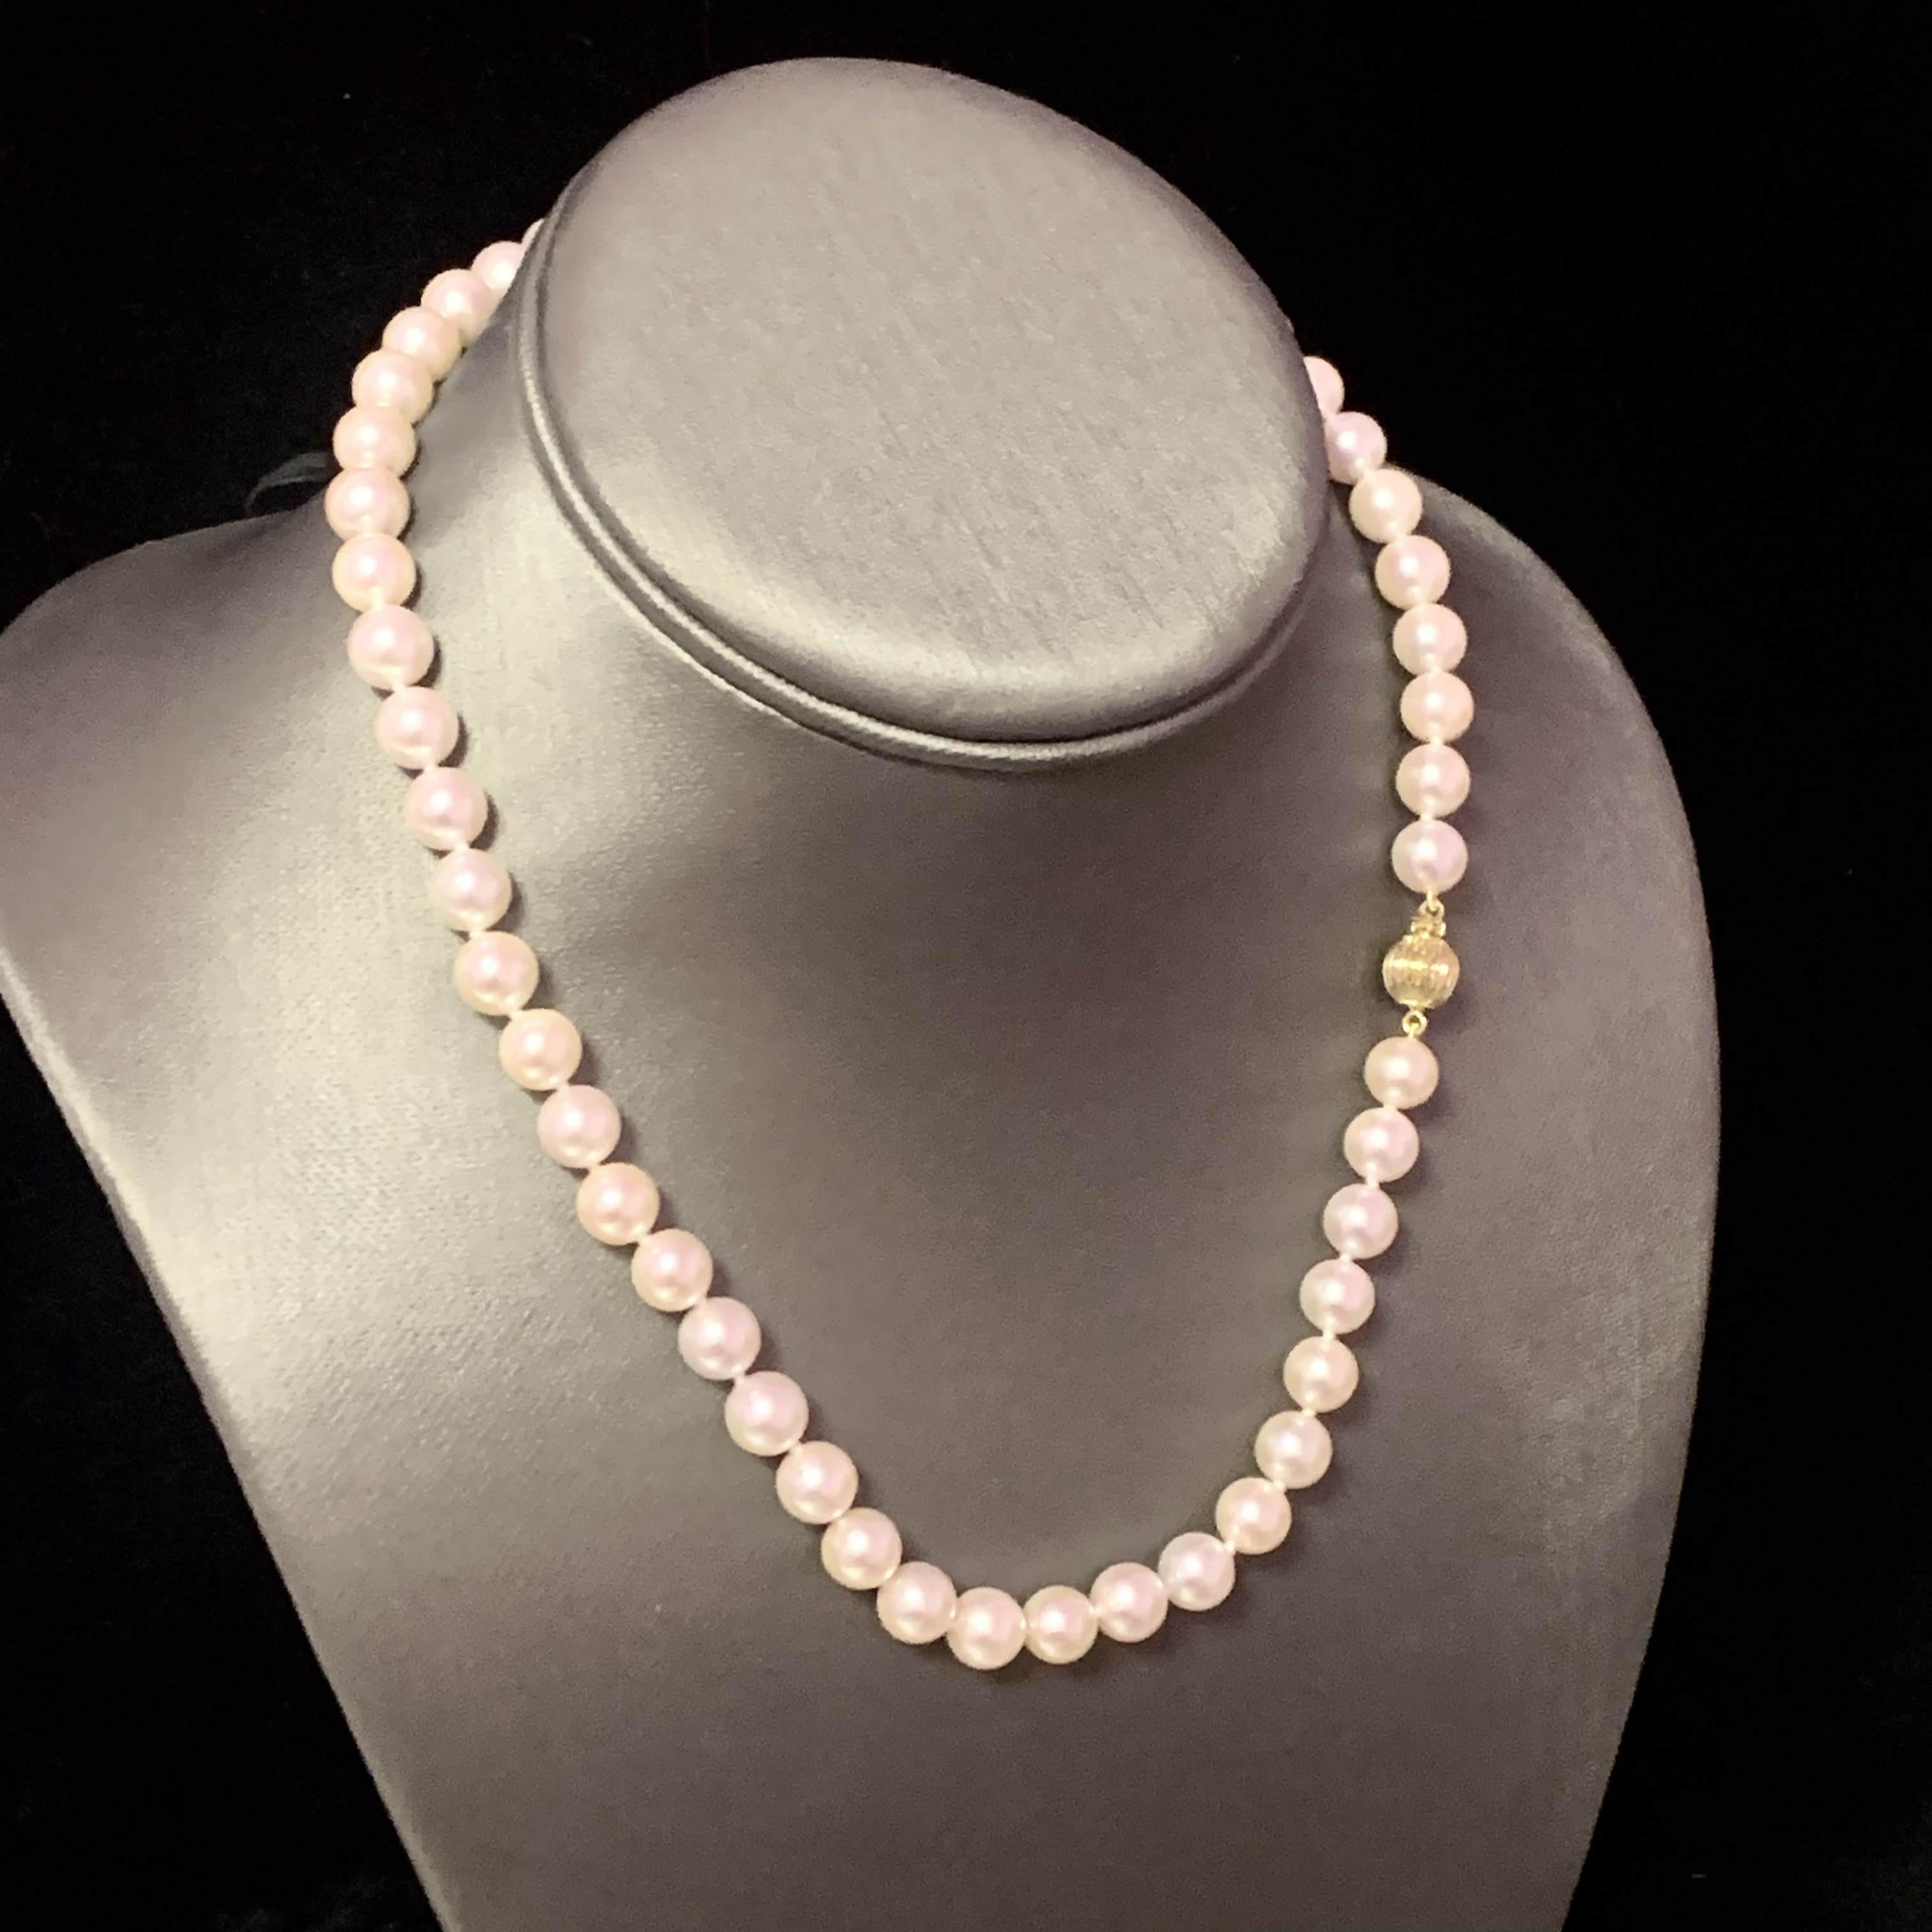 Fine Quality Akoya Pearl Necklace 14k Gold 17